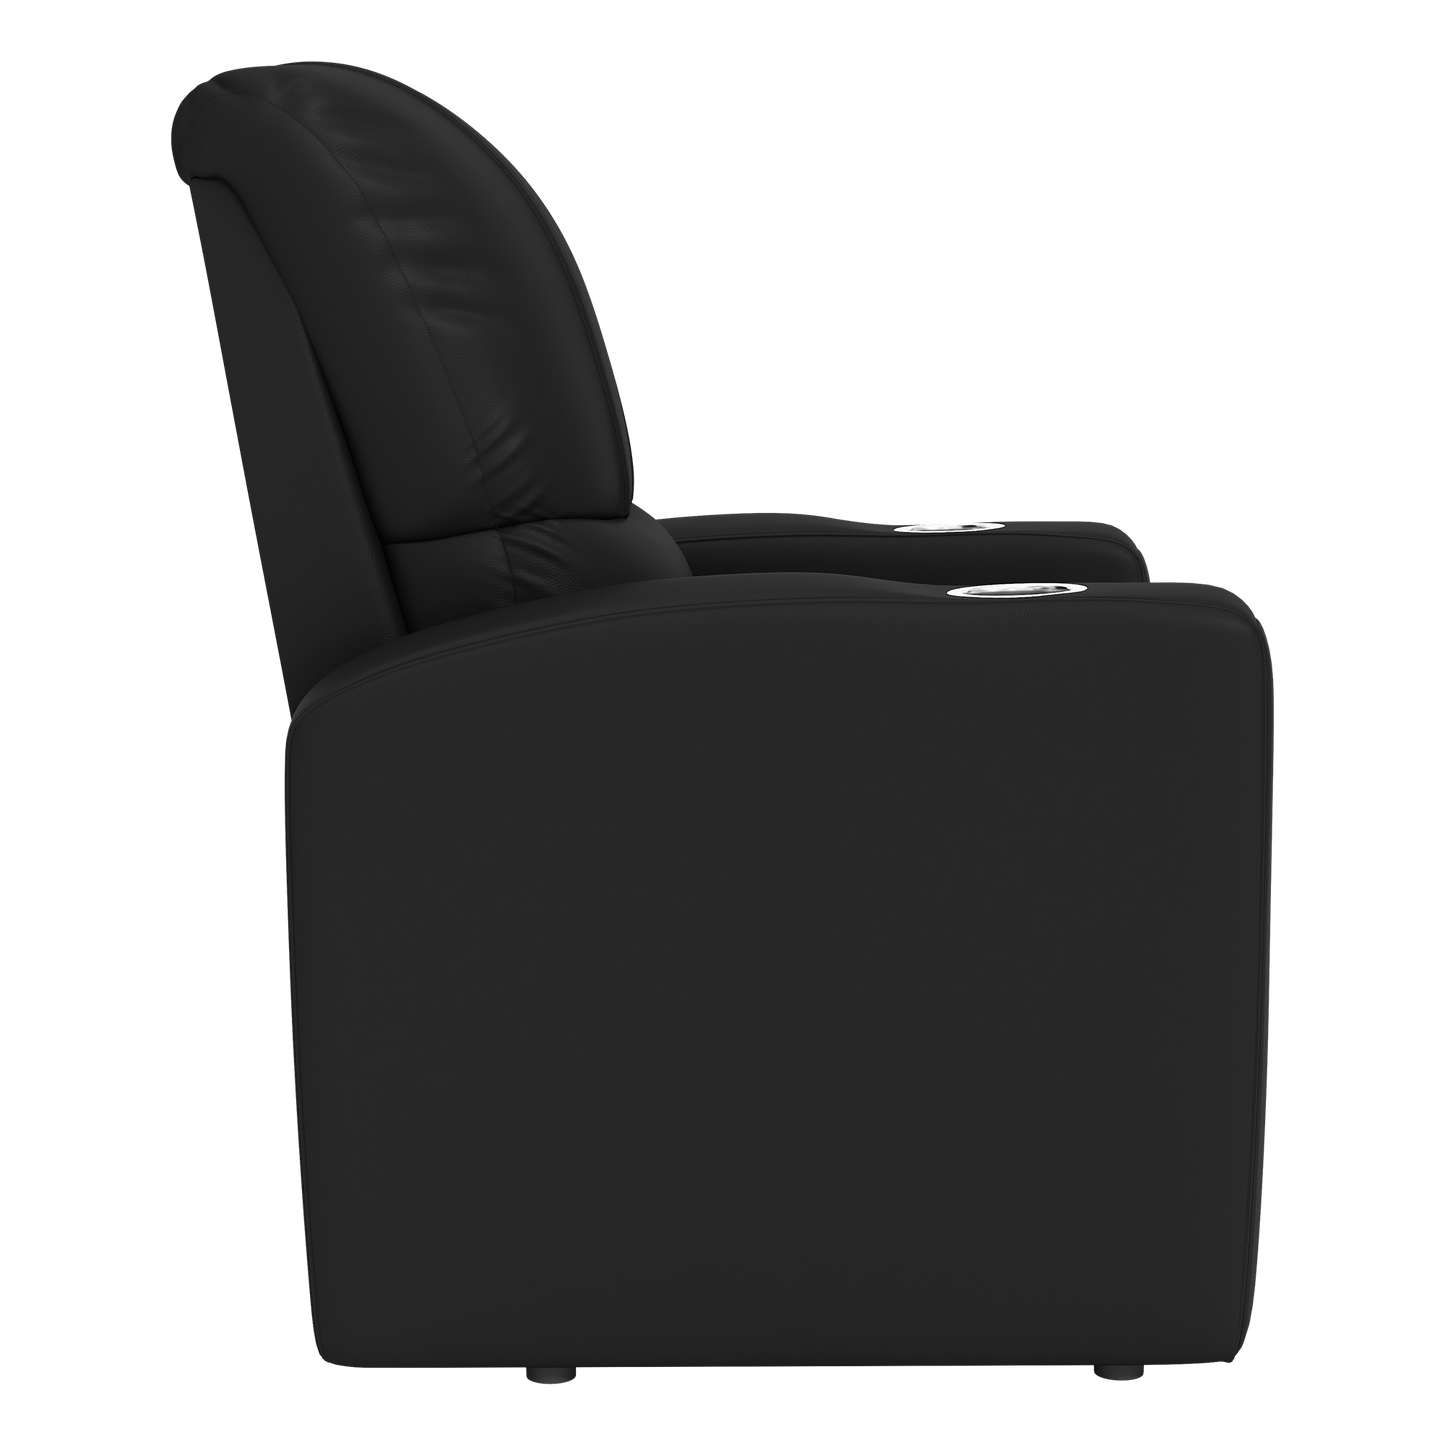 Stealth Recliner with Ohio State Block O Logo